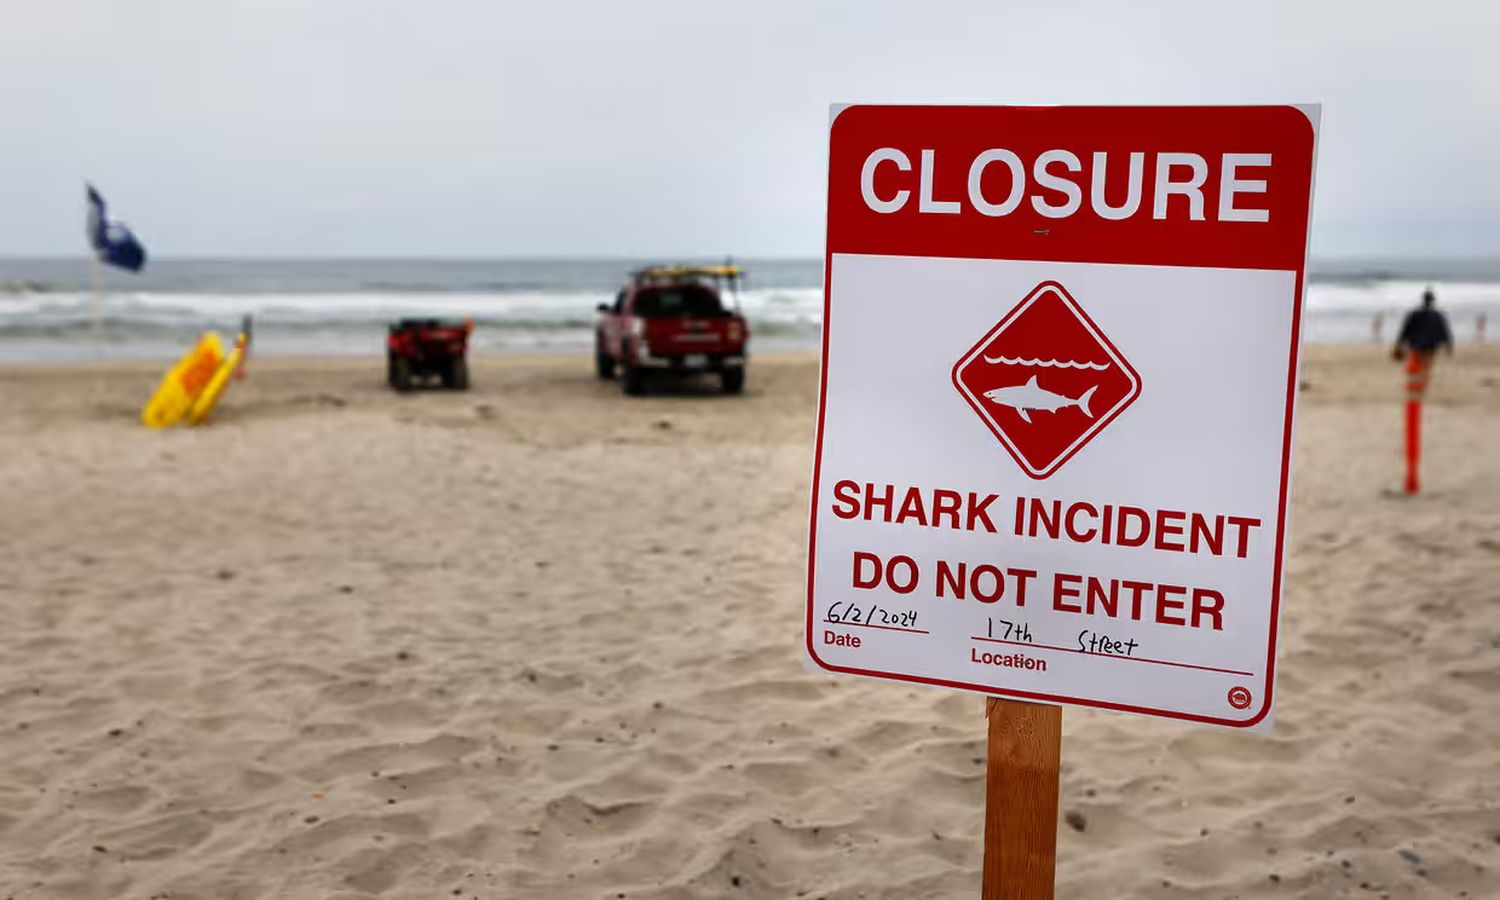 A shark also attacked a man off Del Mar City beach in California on 2 June